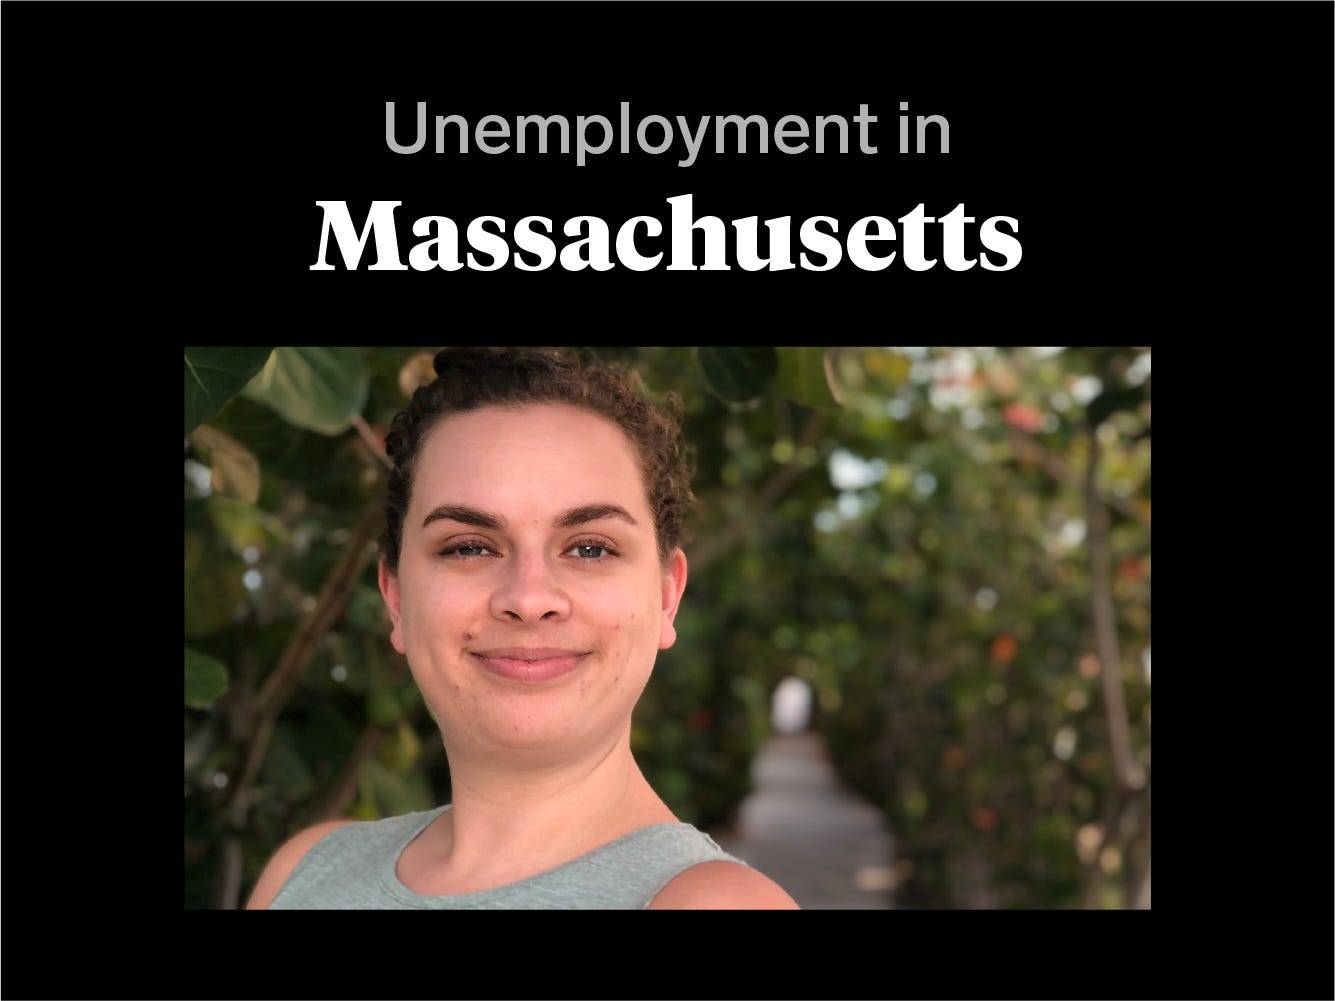 Unemployment diary: I’m a 27-year-old public relations manager in Massachusetts who’s been out of work since March